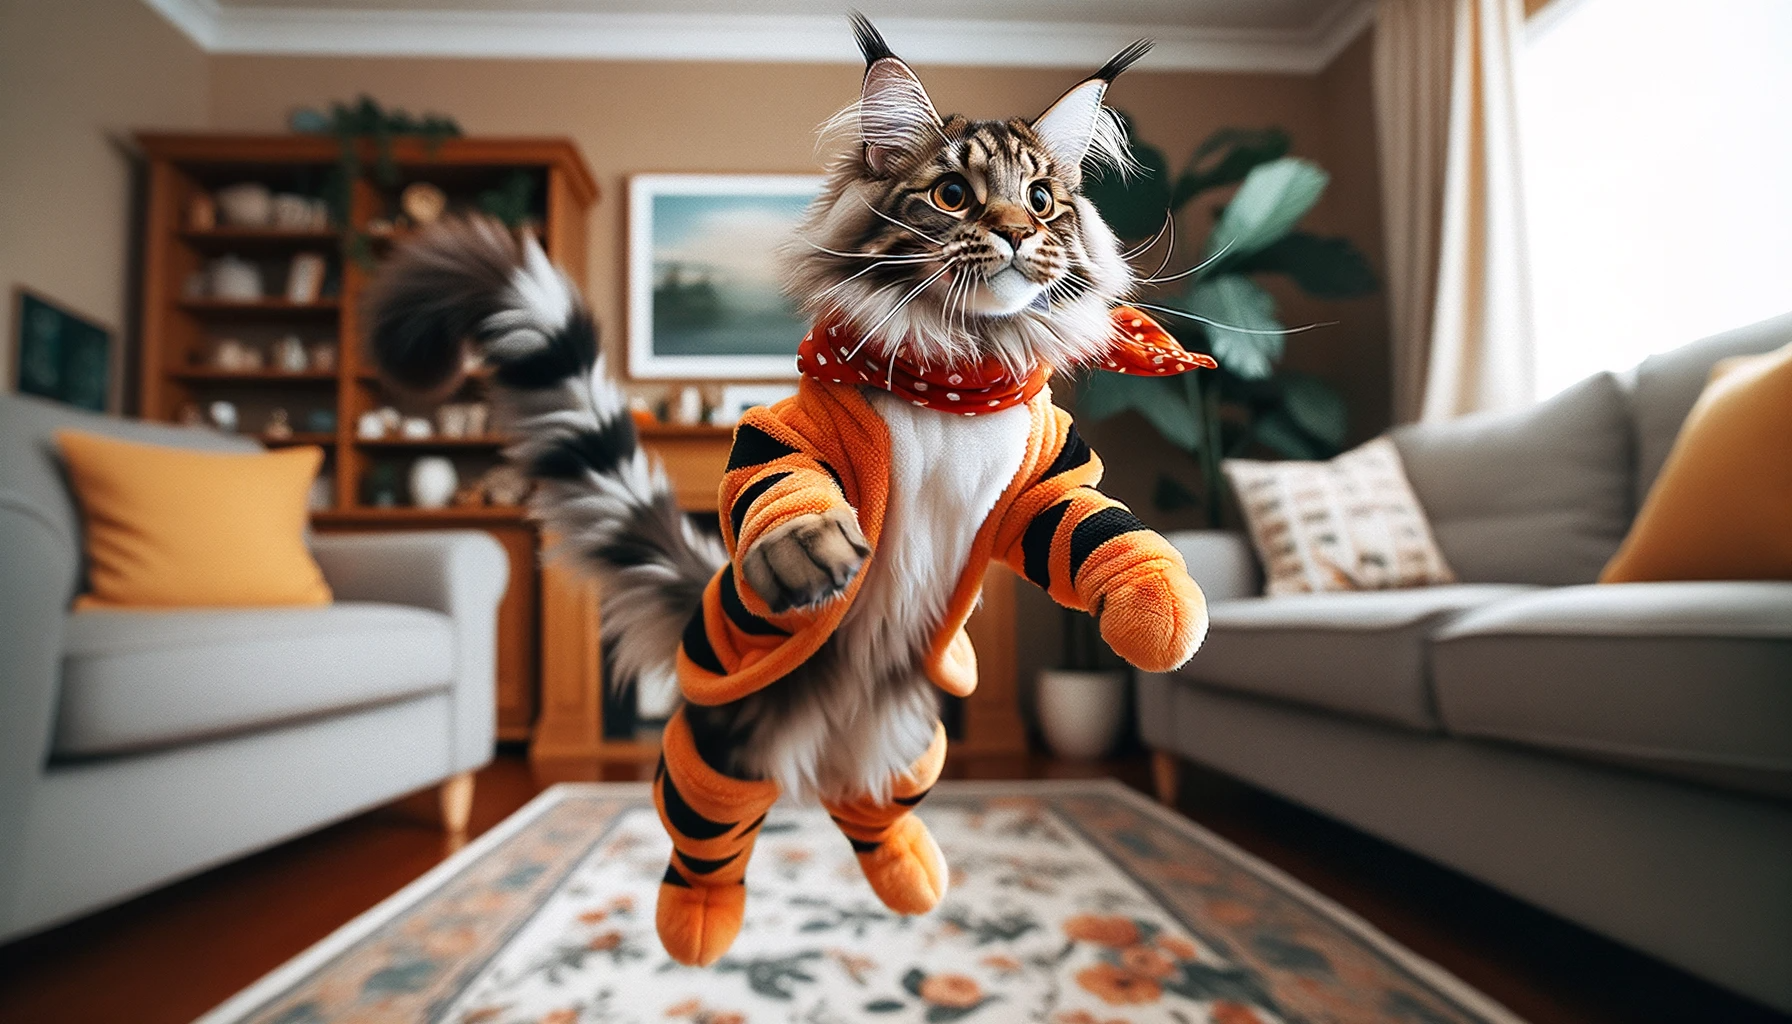 tiger Photo of a Maine Coon cat dressed as Tigger, with an orange and black striped bandana around its neck, leaping playfully in a living room setting.png